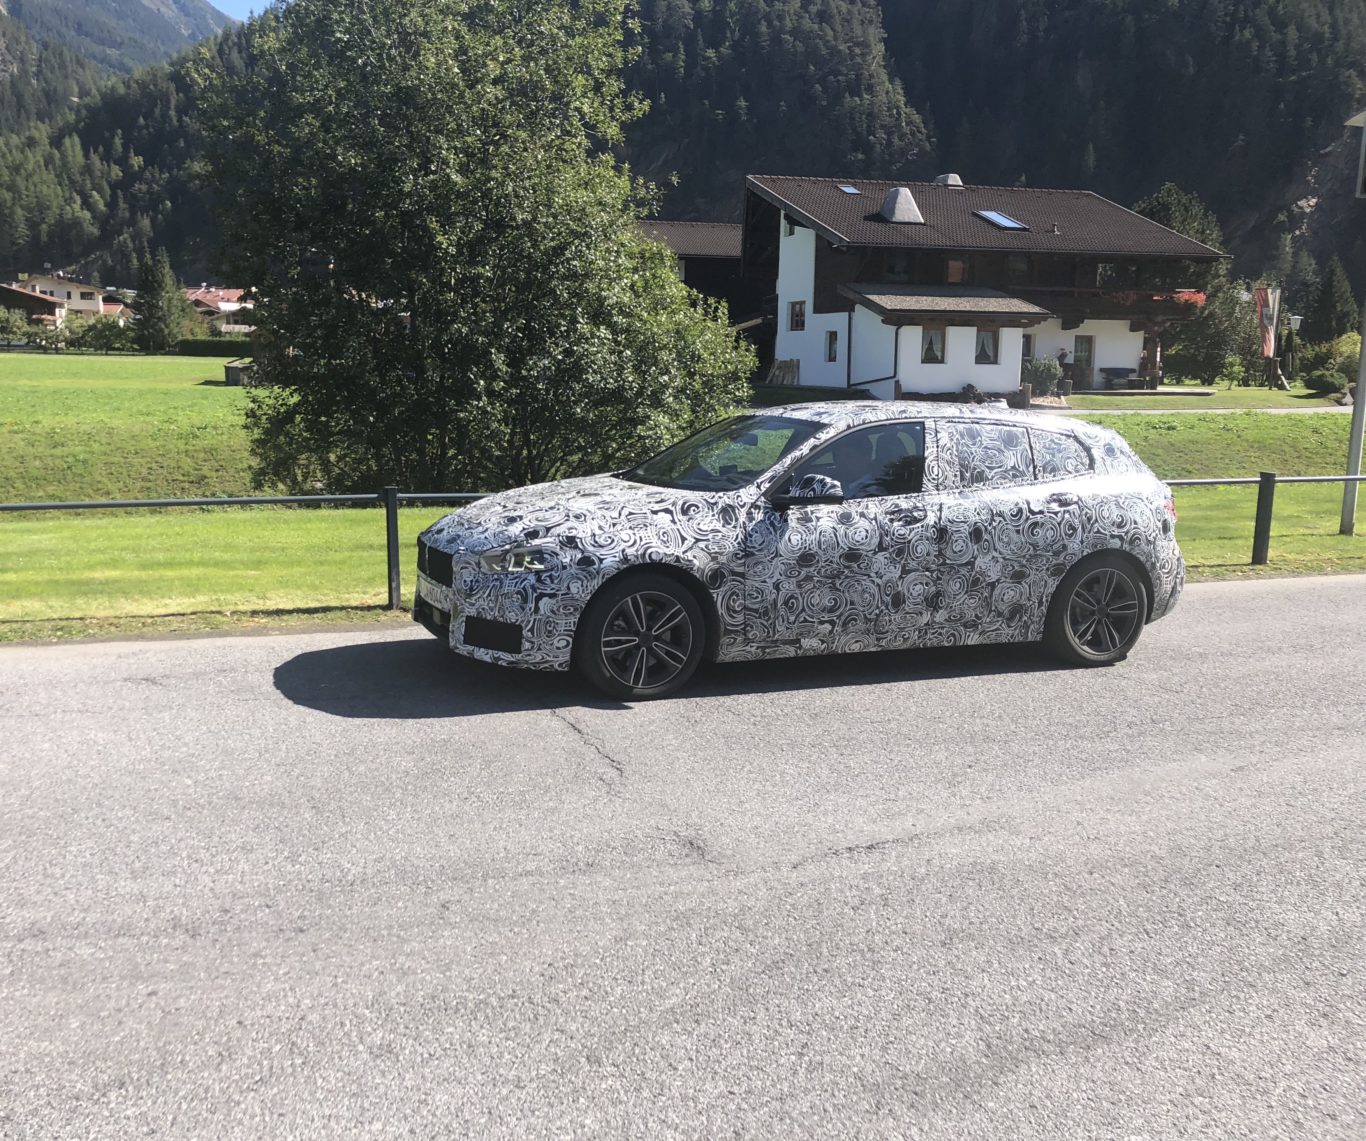 The 1 Series is due to be front-wheel-drive for the first time in the car's history